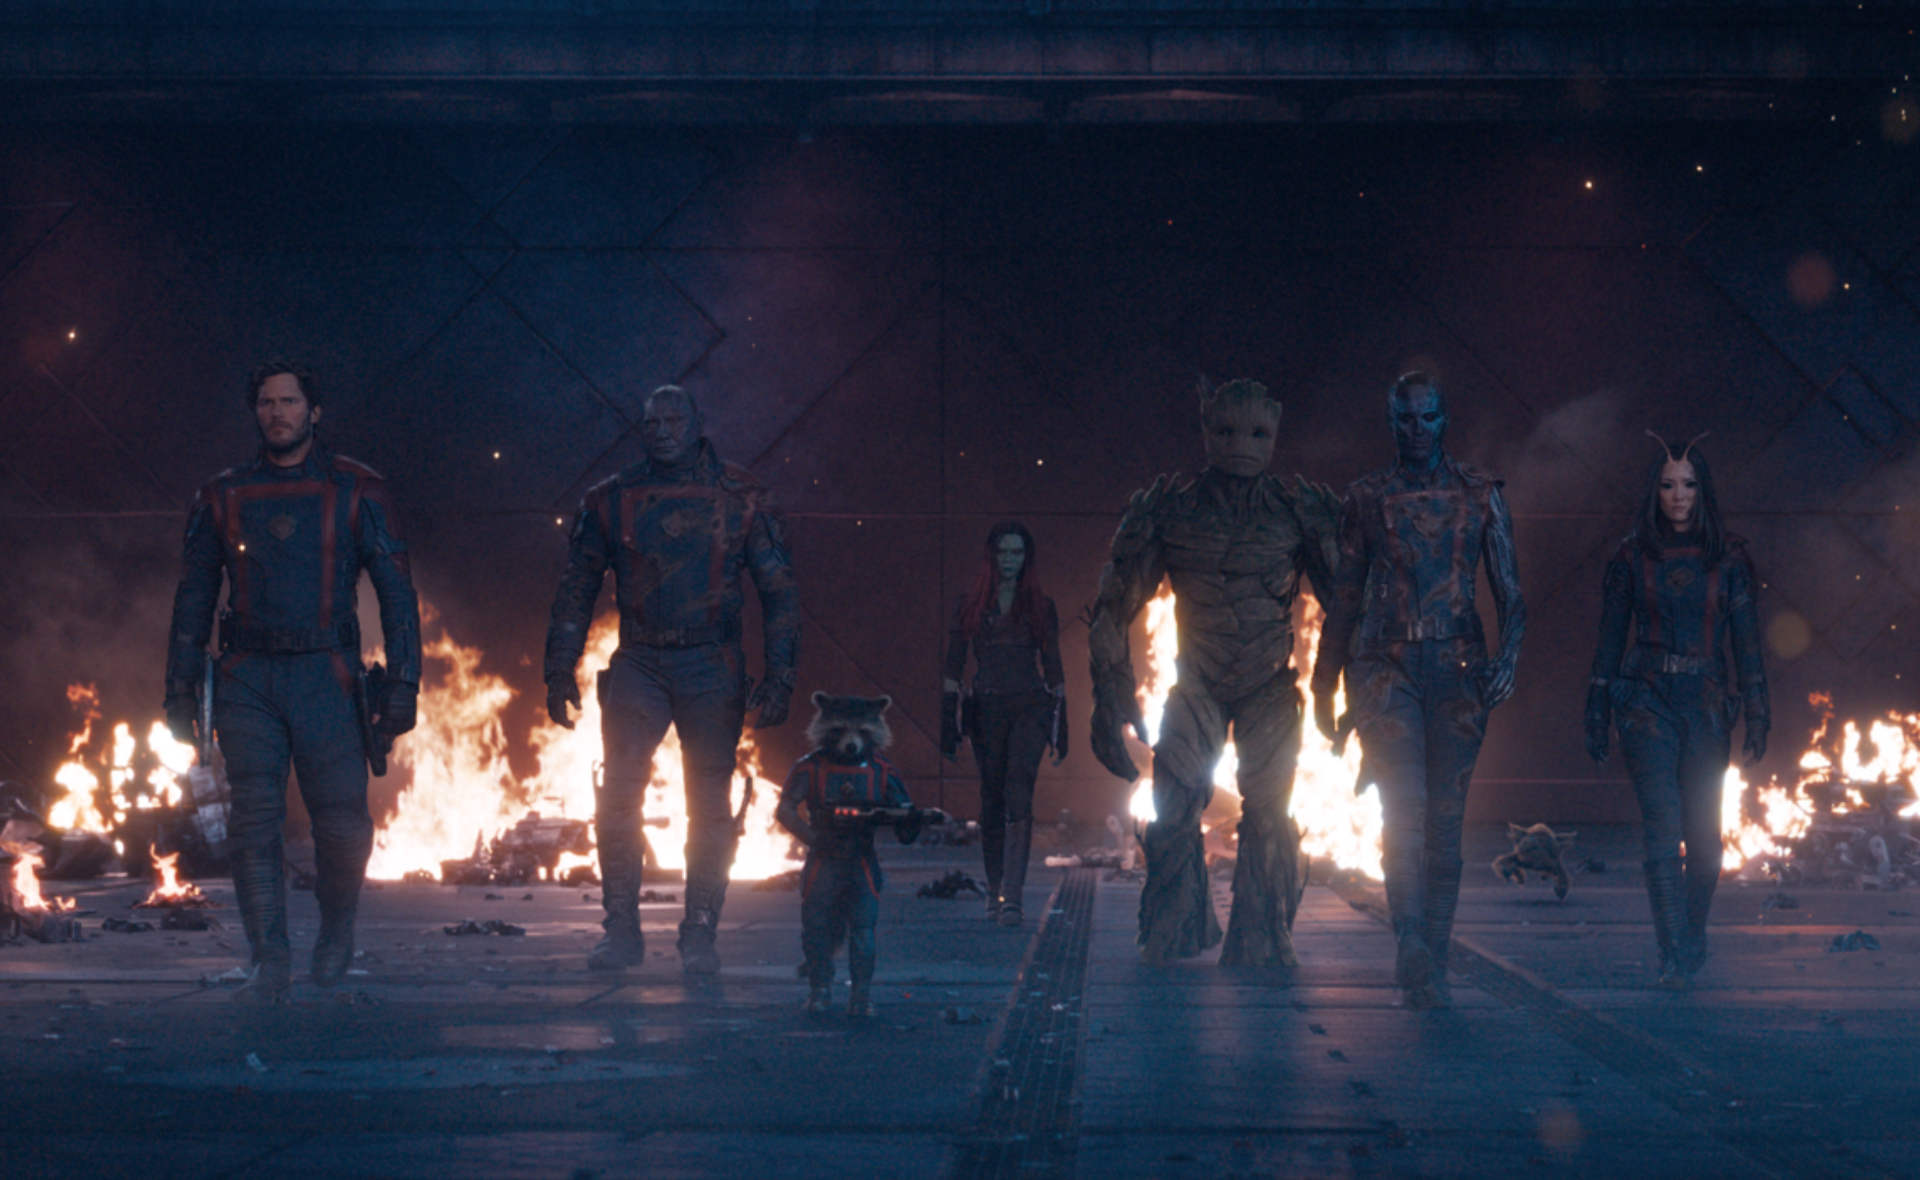 The cast of Guardians of The Galaxy Vol 3 reflect on the film franchise that changed their careers